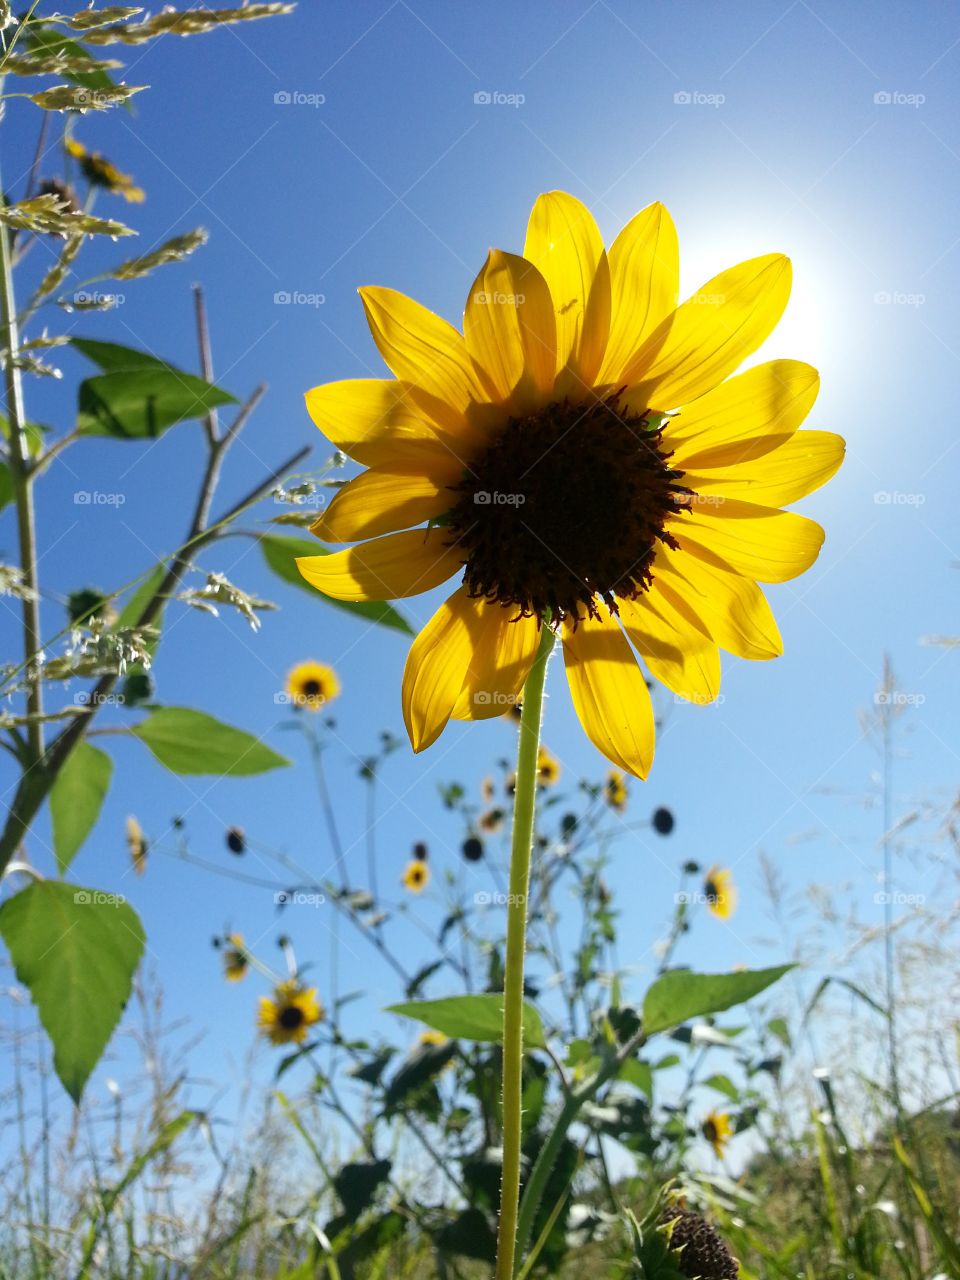 sunflower out in nature